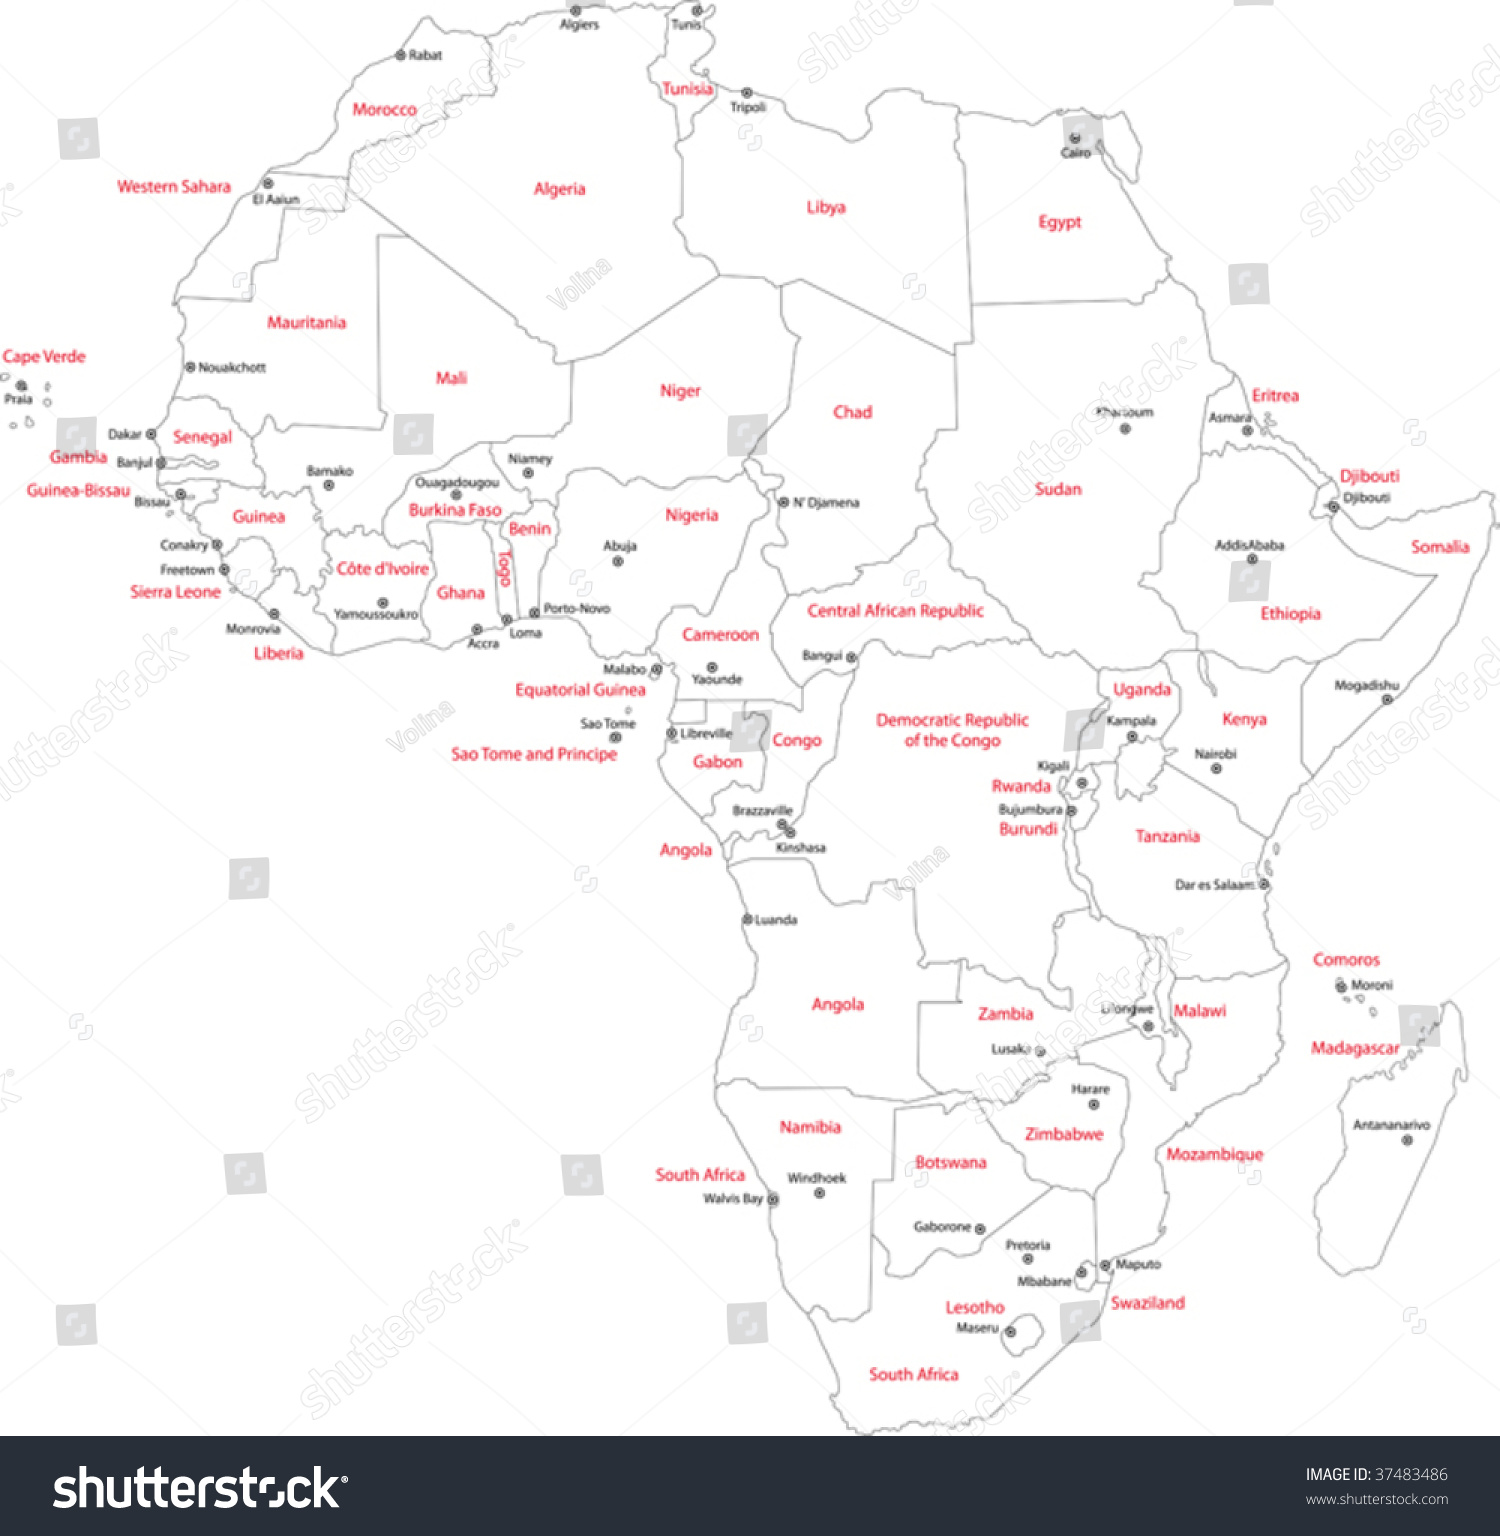 Stock Vector Africa Map With Countries And Capital Cities 37483486 